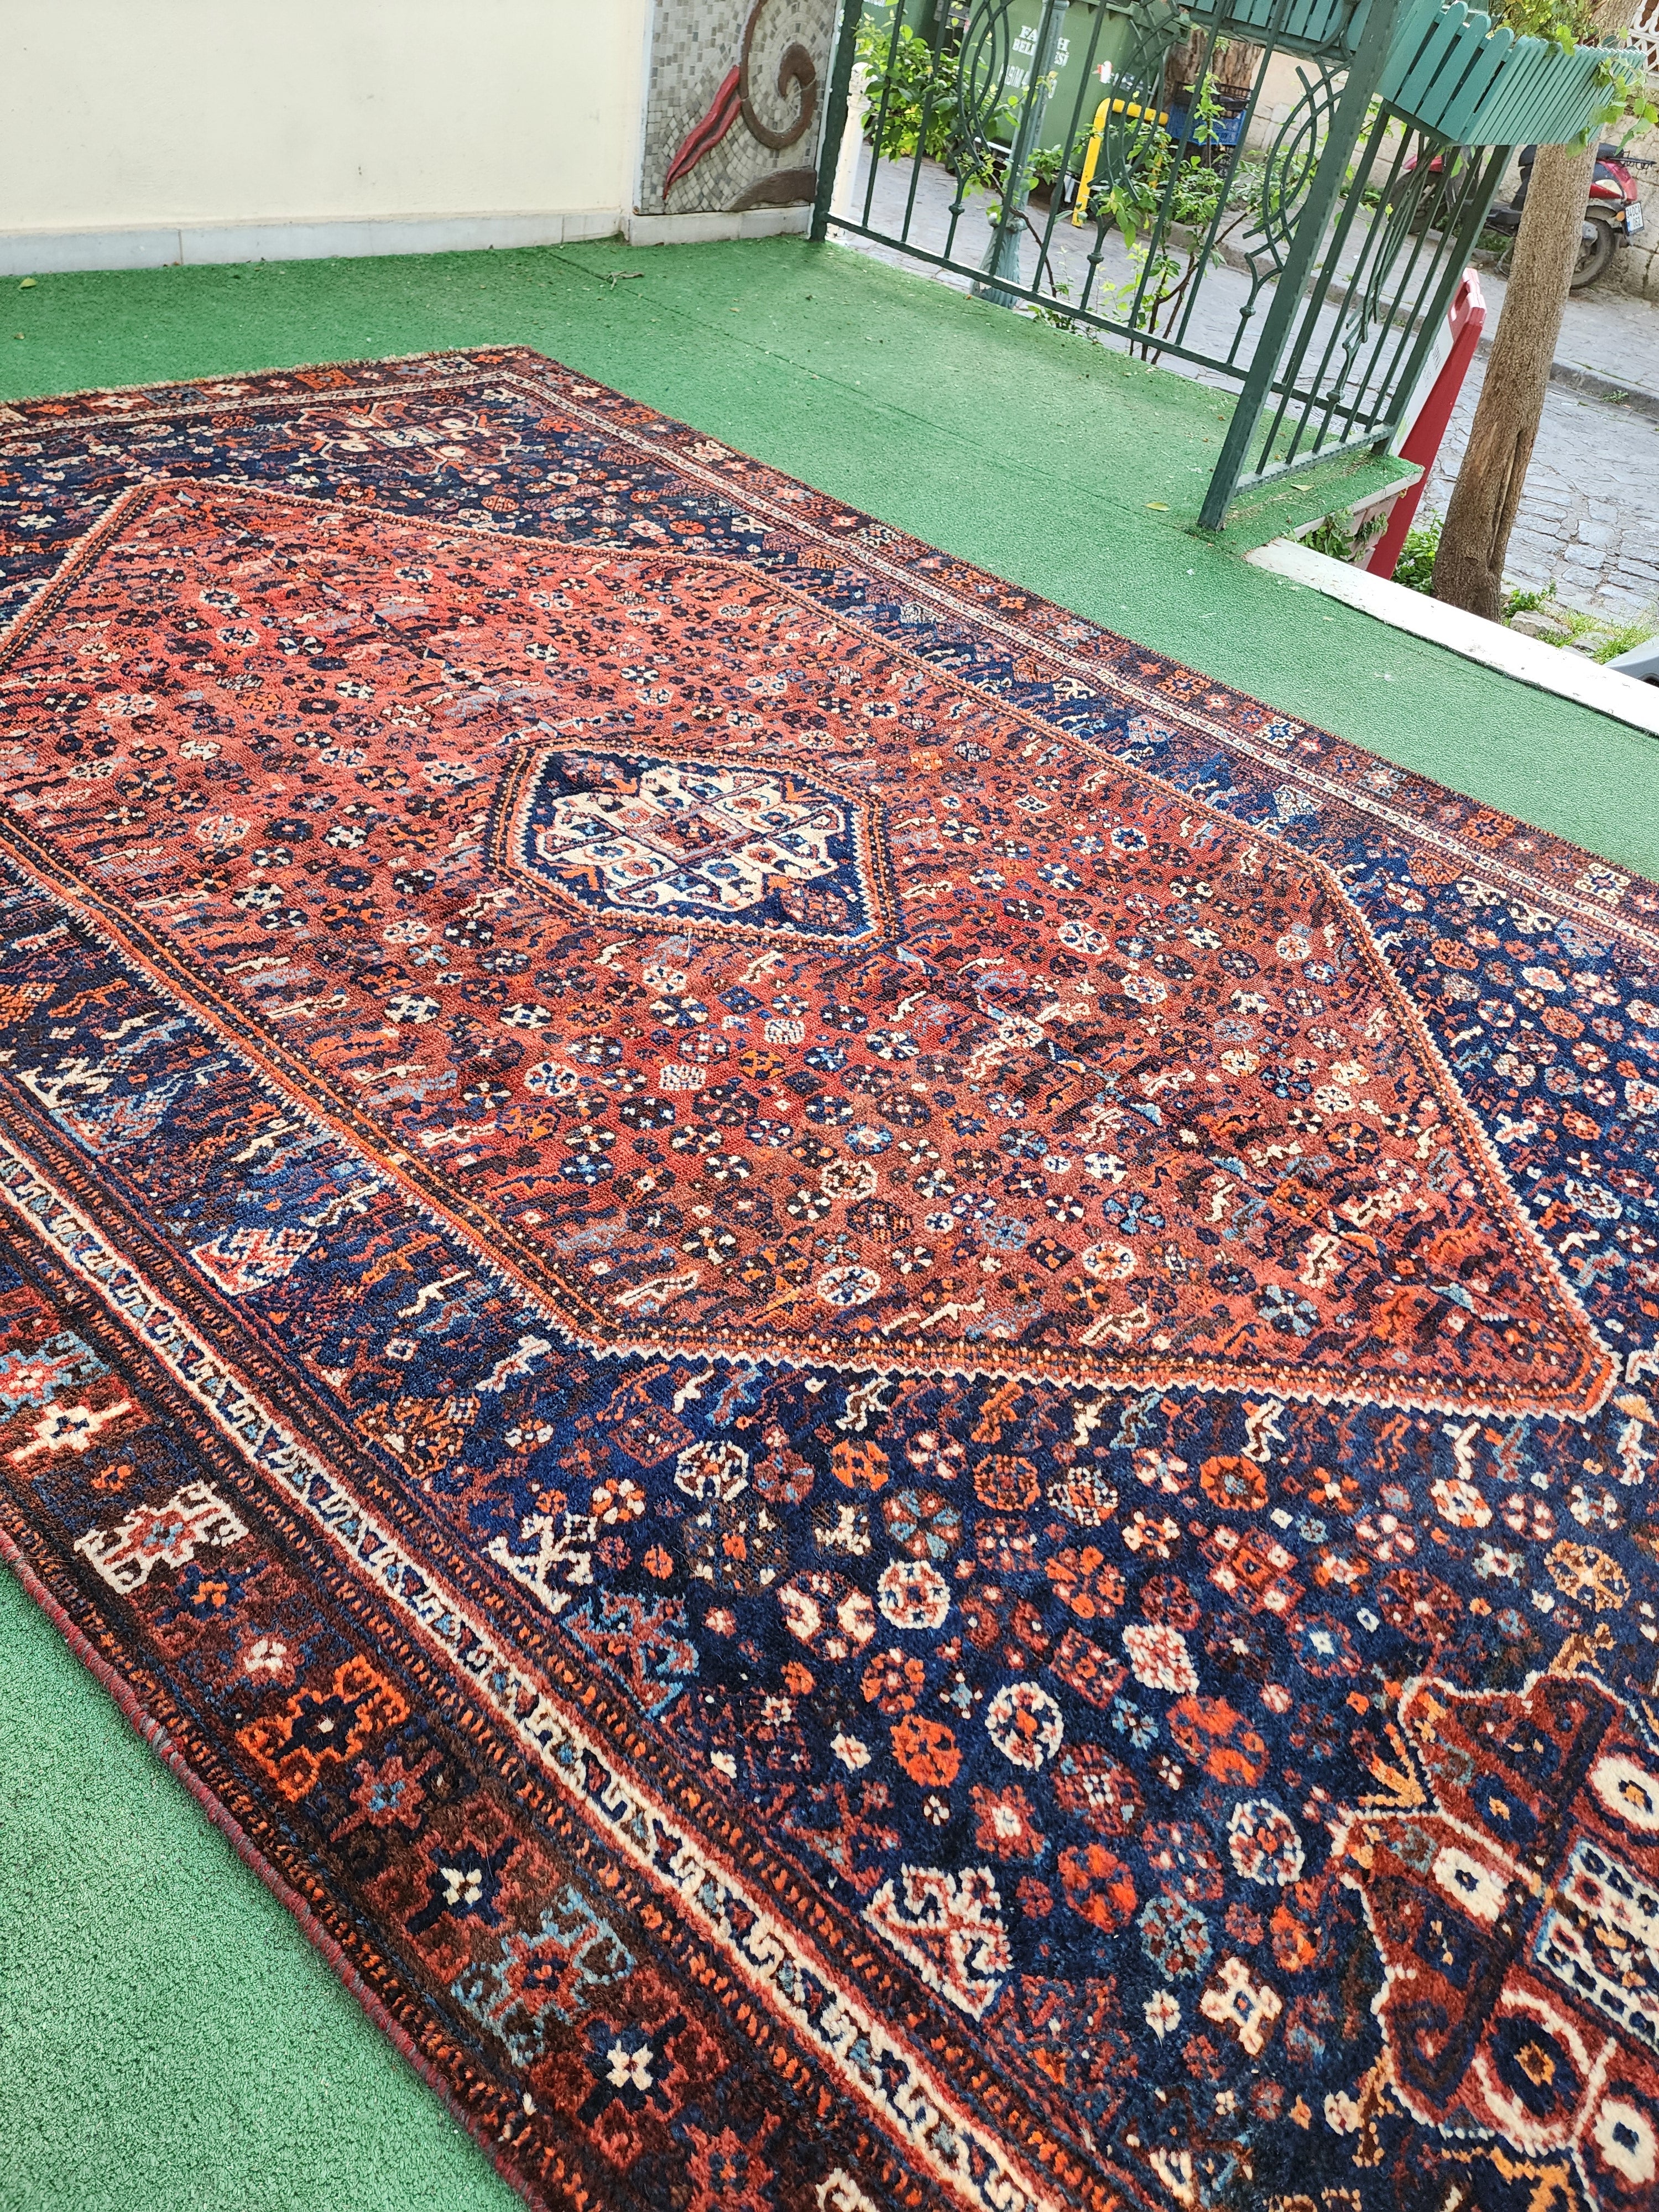 Red and Blue Antique Persian Shiraz Rug 9'10''x6'6''